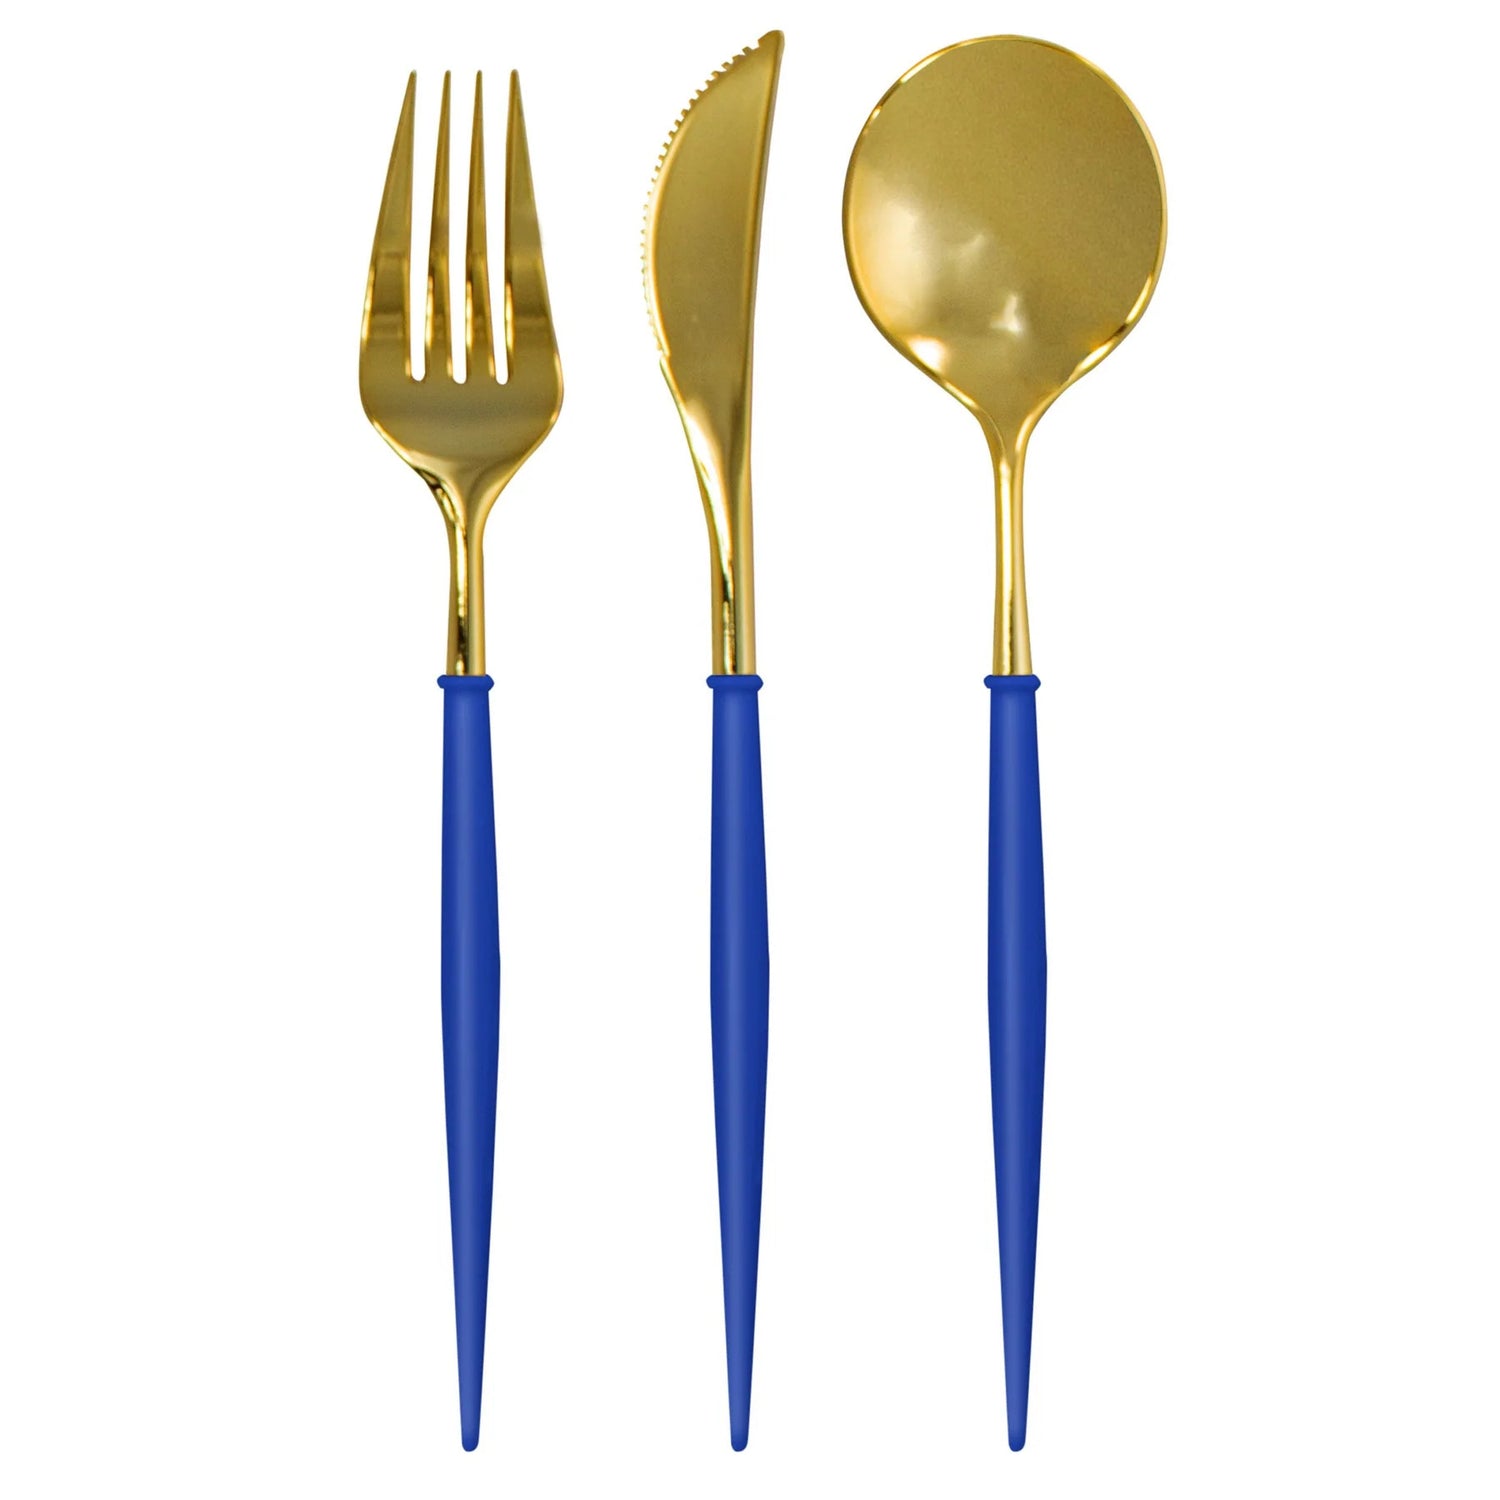 Bella Plastic Cutlery in Gold and Blue. Sleek, modern disposable spoon, fork, and knife set by Sophistiplate, perfect for elevating any event table setting.